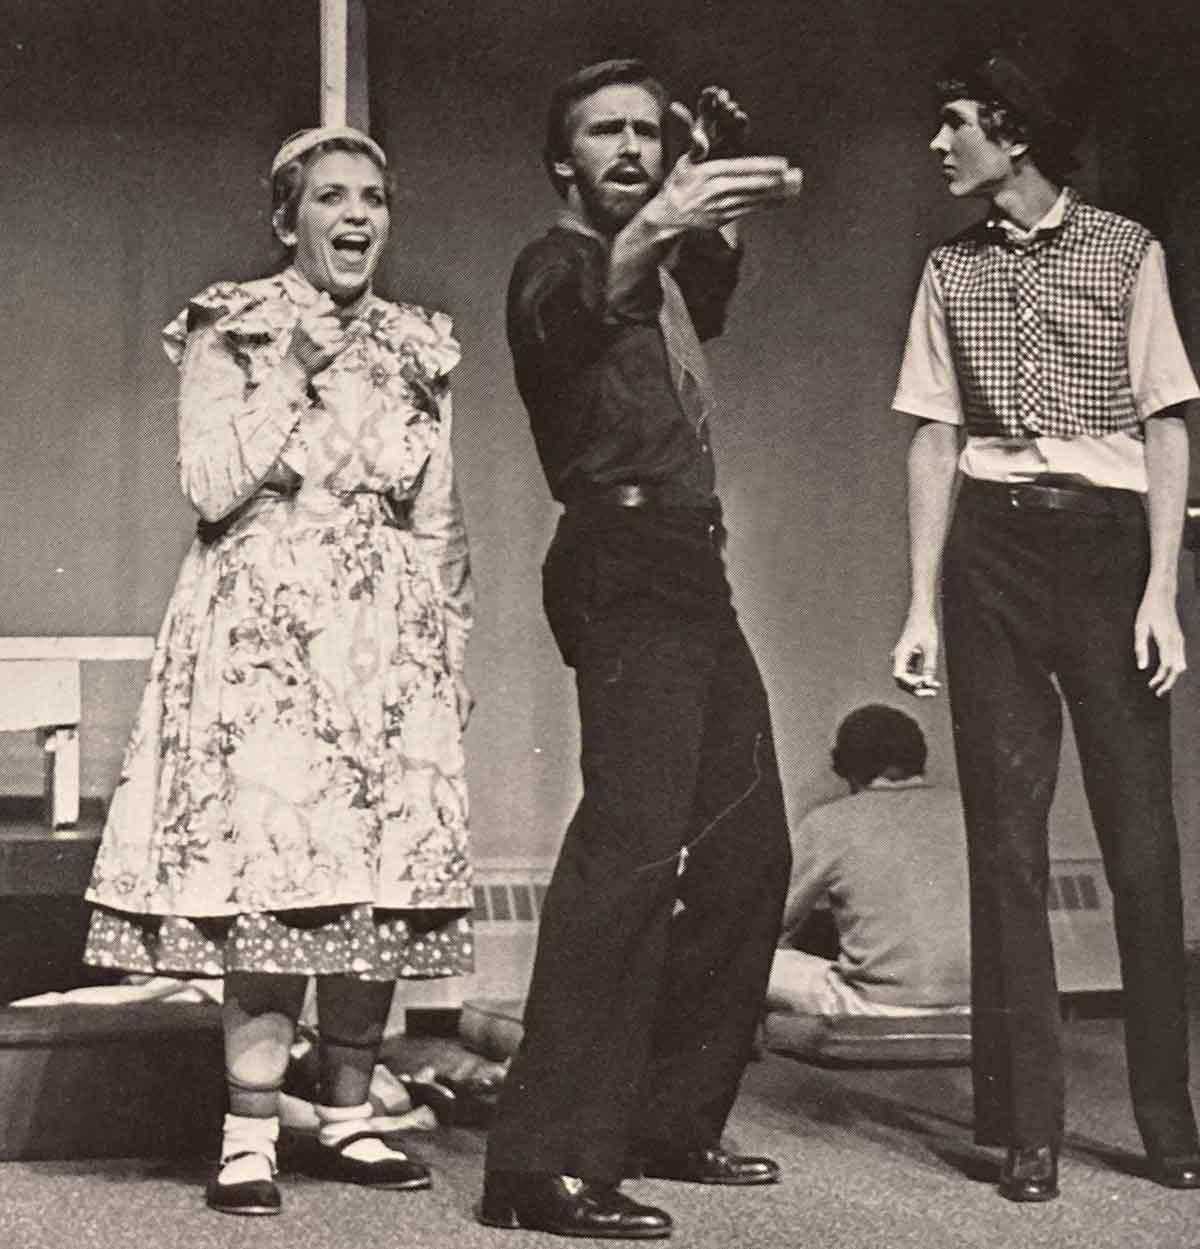 Black and white photo of three Houghton students in costume acting on stage.